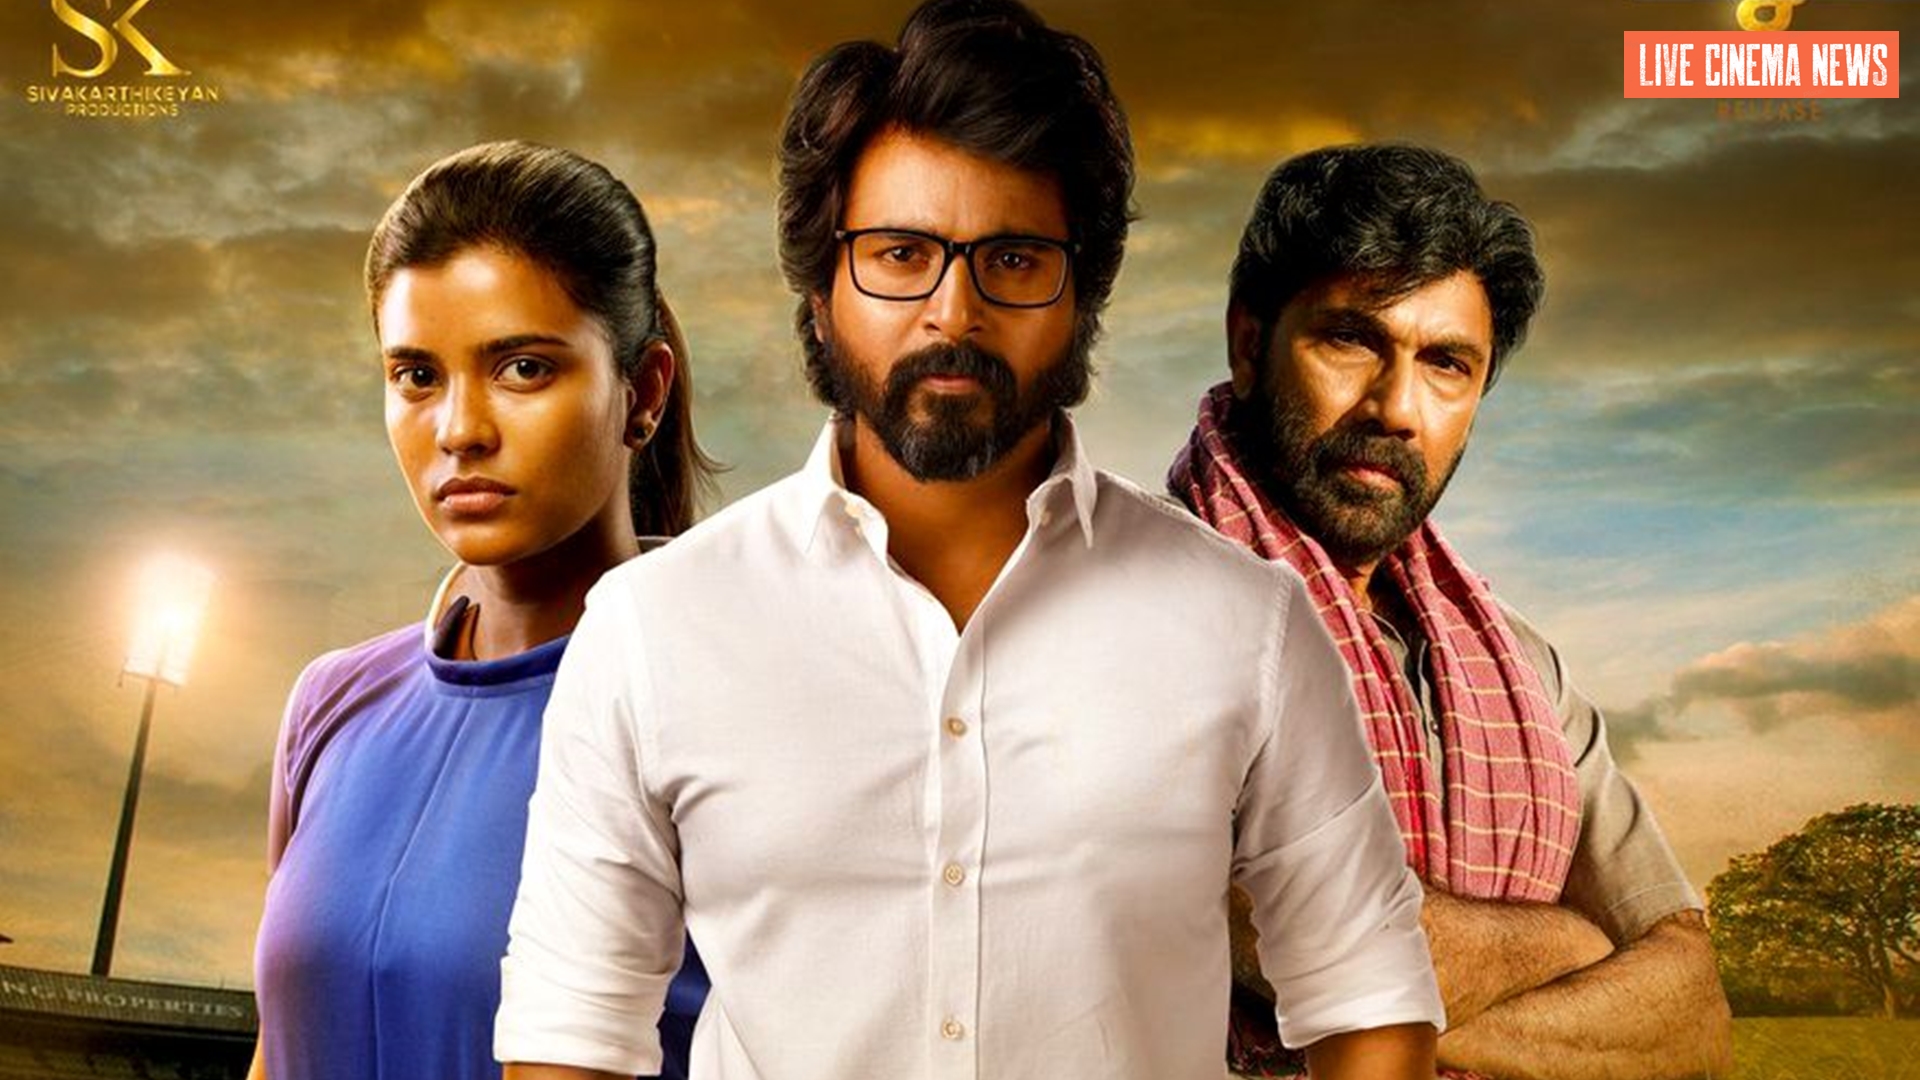 The remake of “Kanaa” marks Sivakarthikeyan debut in the Bollywood industry